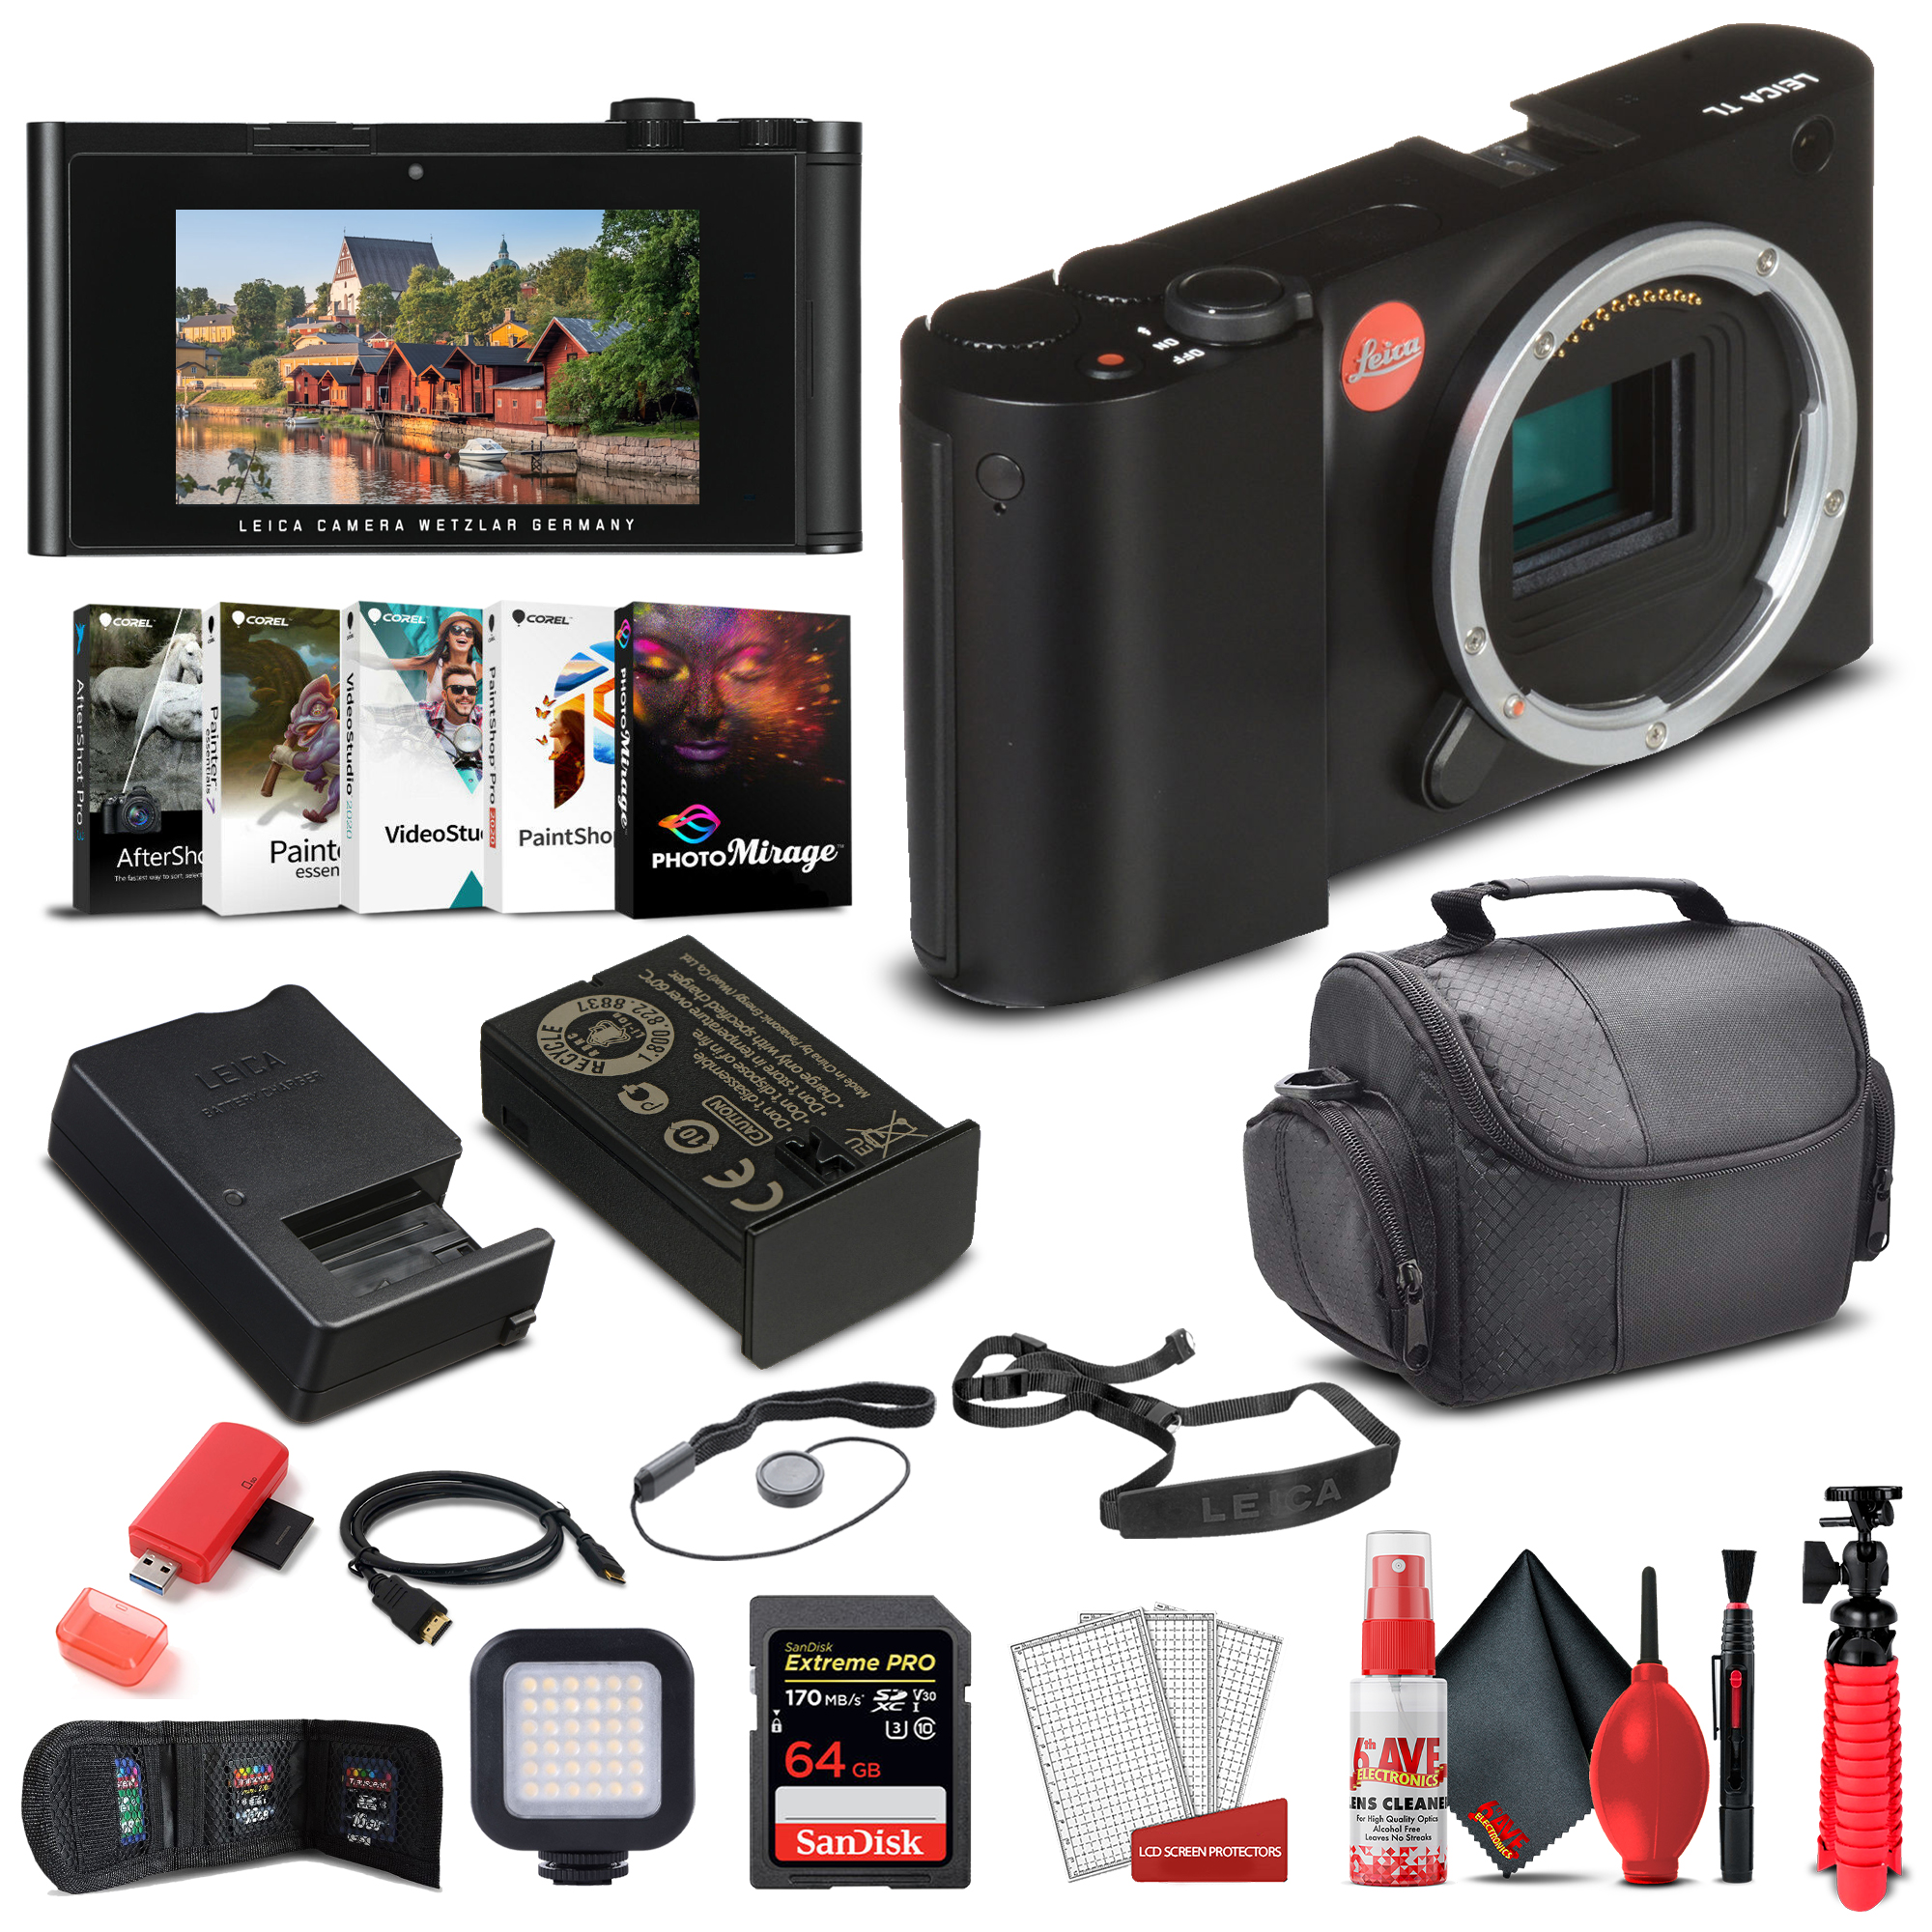 Leica TL Mirrorless Digital Camera (Black) (18146) + 64GB Extreme Pro Card + Corel Photo Software + Portable LED Video Light + Card Reader + Case +  Cleaning Set + HDMI Cable and More - Deluxe Bundle - image 1 of 6